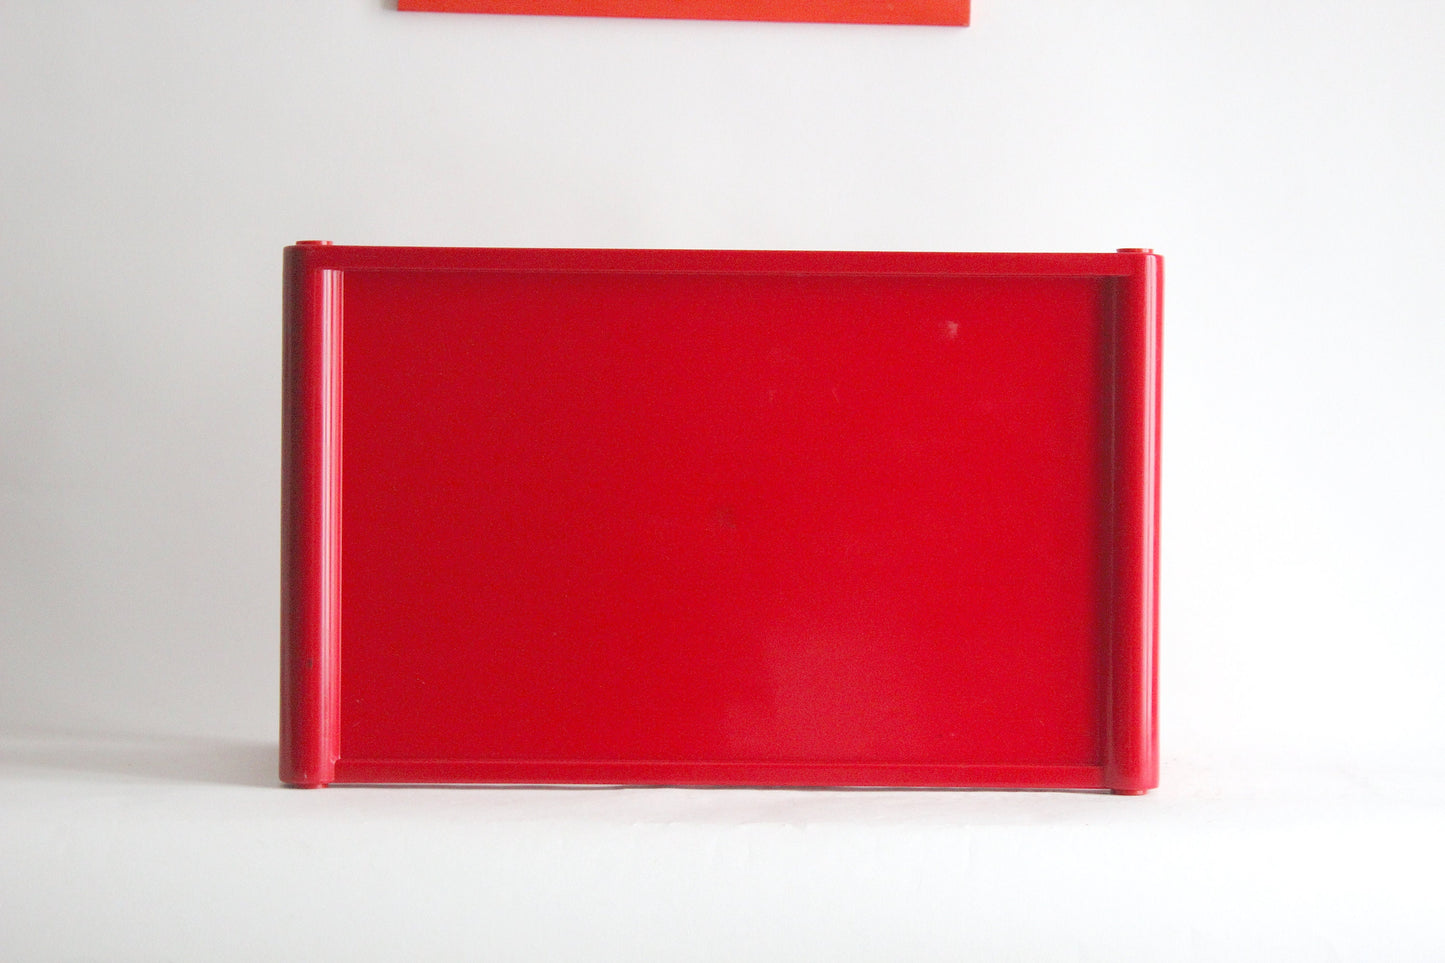 Vintage red Luigi Massoni for Guzzini bed foldable tray - folding table - space age - 1970s/1980s